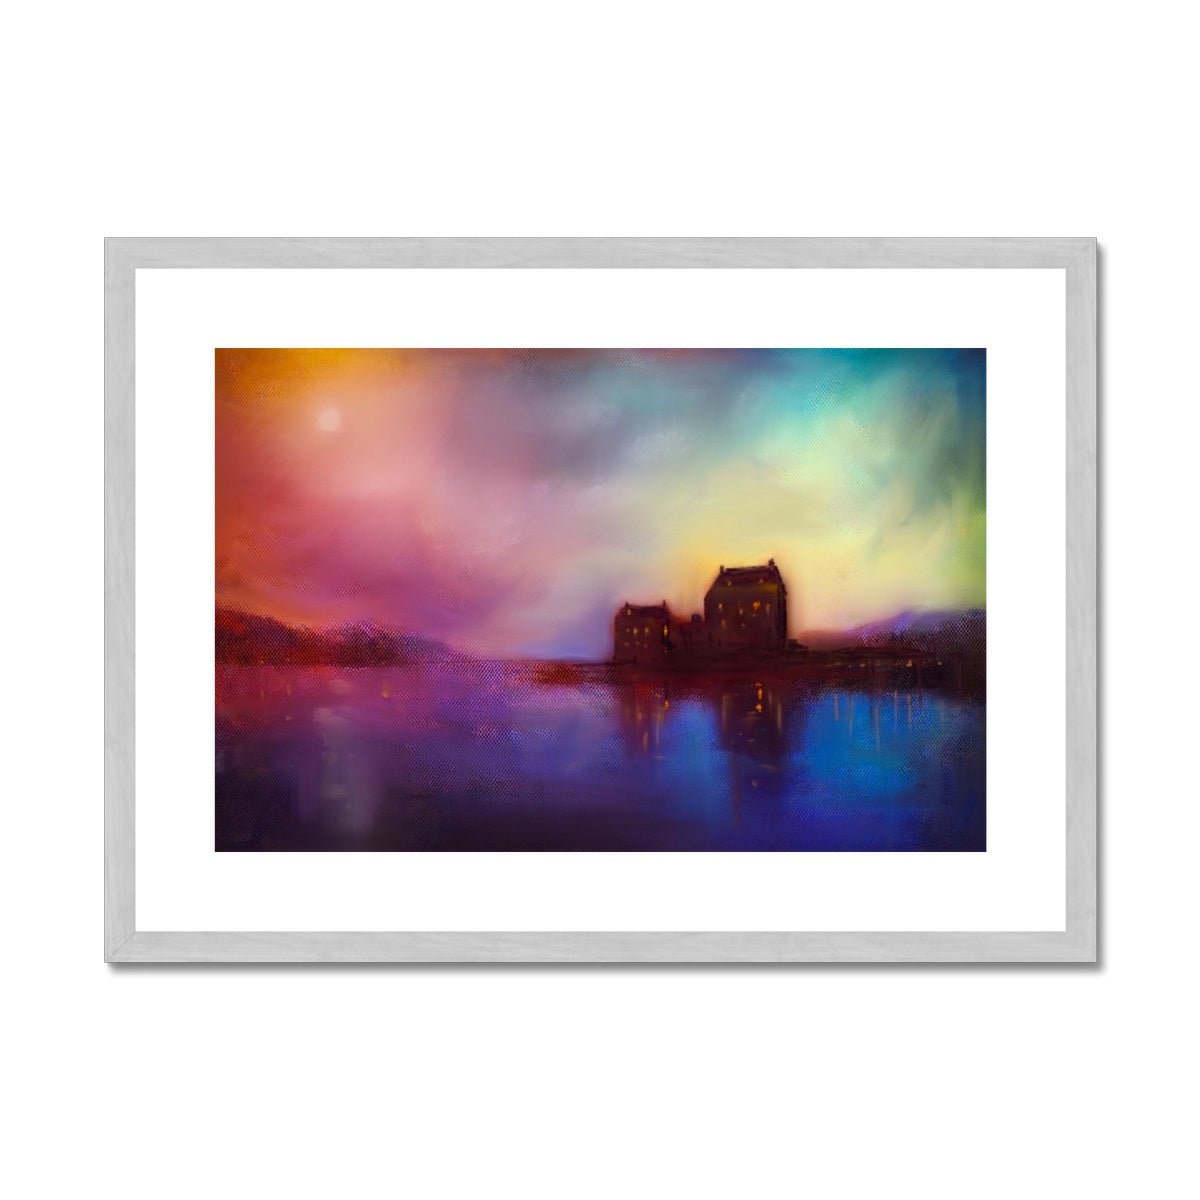 Eilean Donan Castle Sunset Painting | Antique Framed & Mounted Prints From Scotland-Antique Framed & Mounted Prints-Scottish Castles Art Gallery-A2 Landscape-Silver Frame-Paintings, Prints, Homeware, Art Gifts From Scotland By Scottish Artist Kevin Hunter